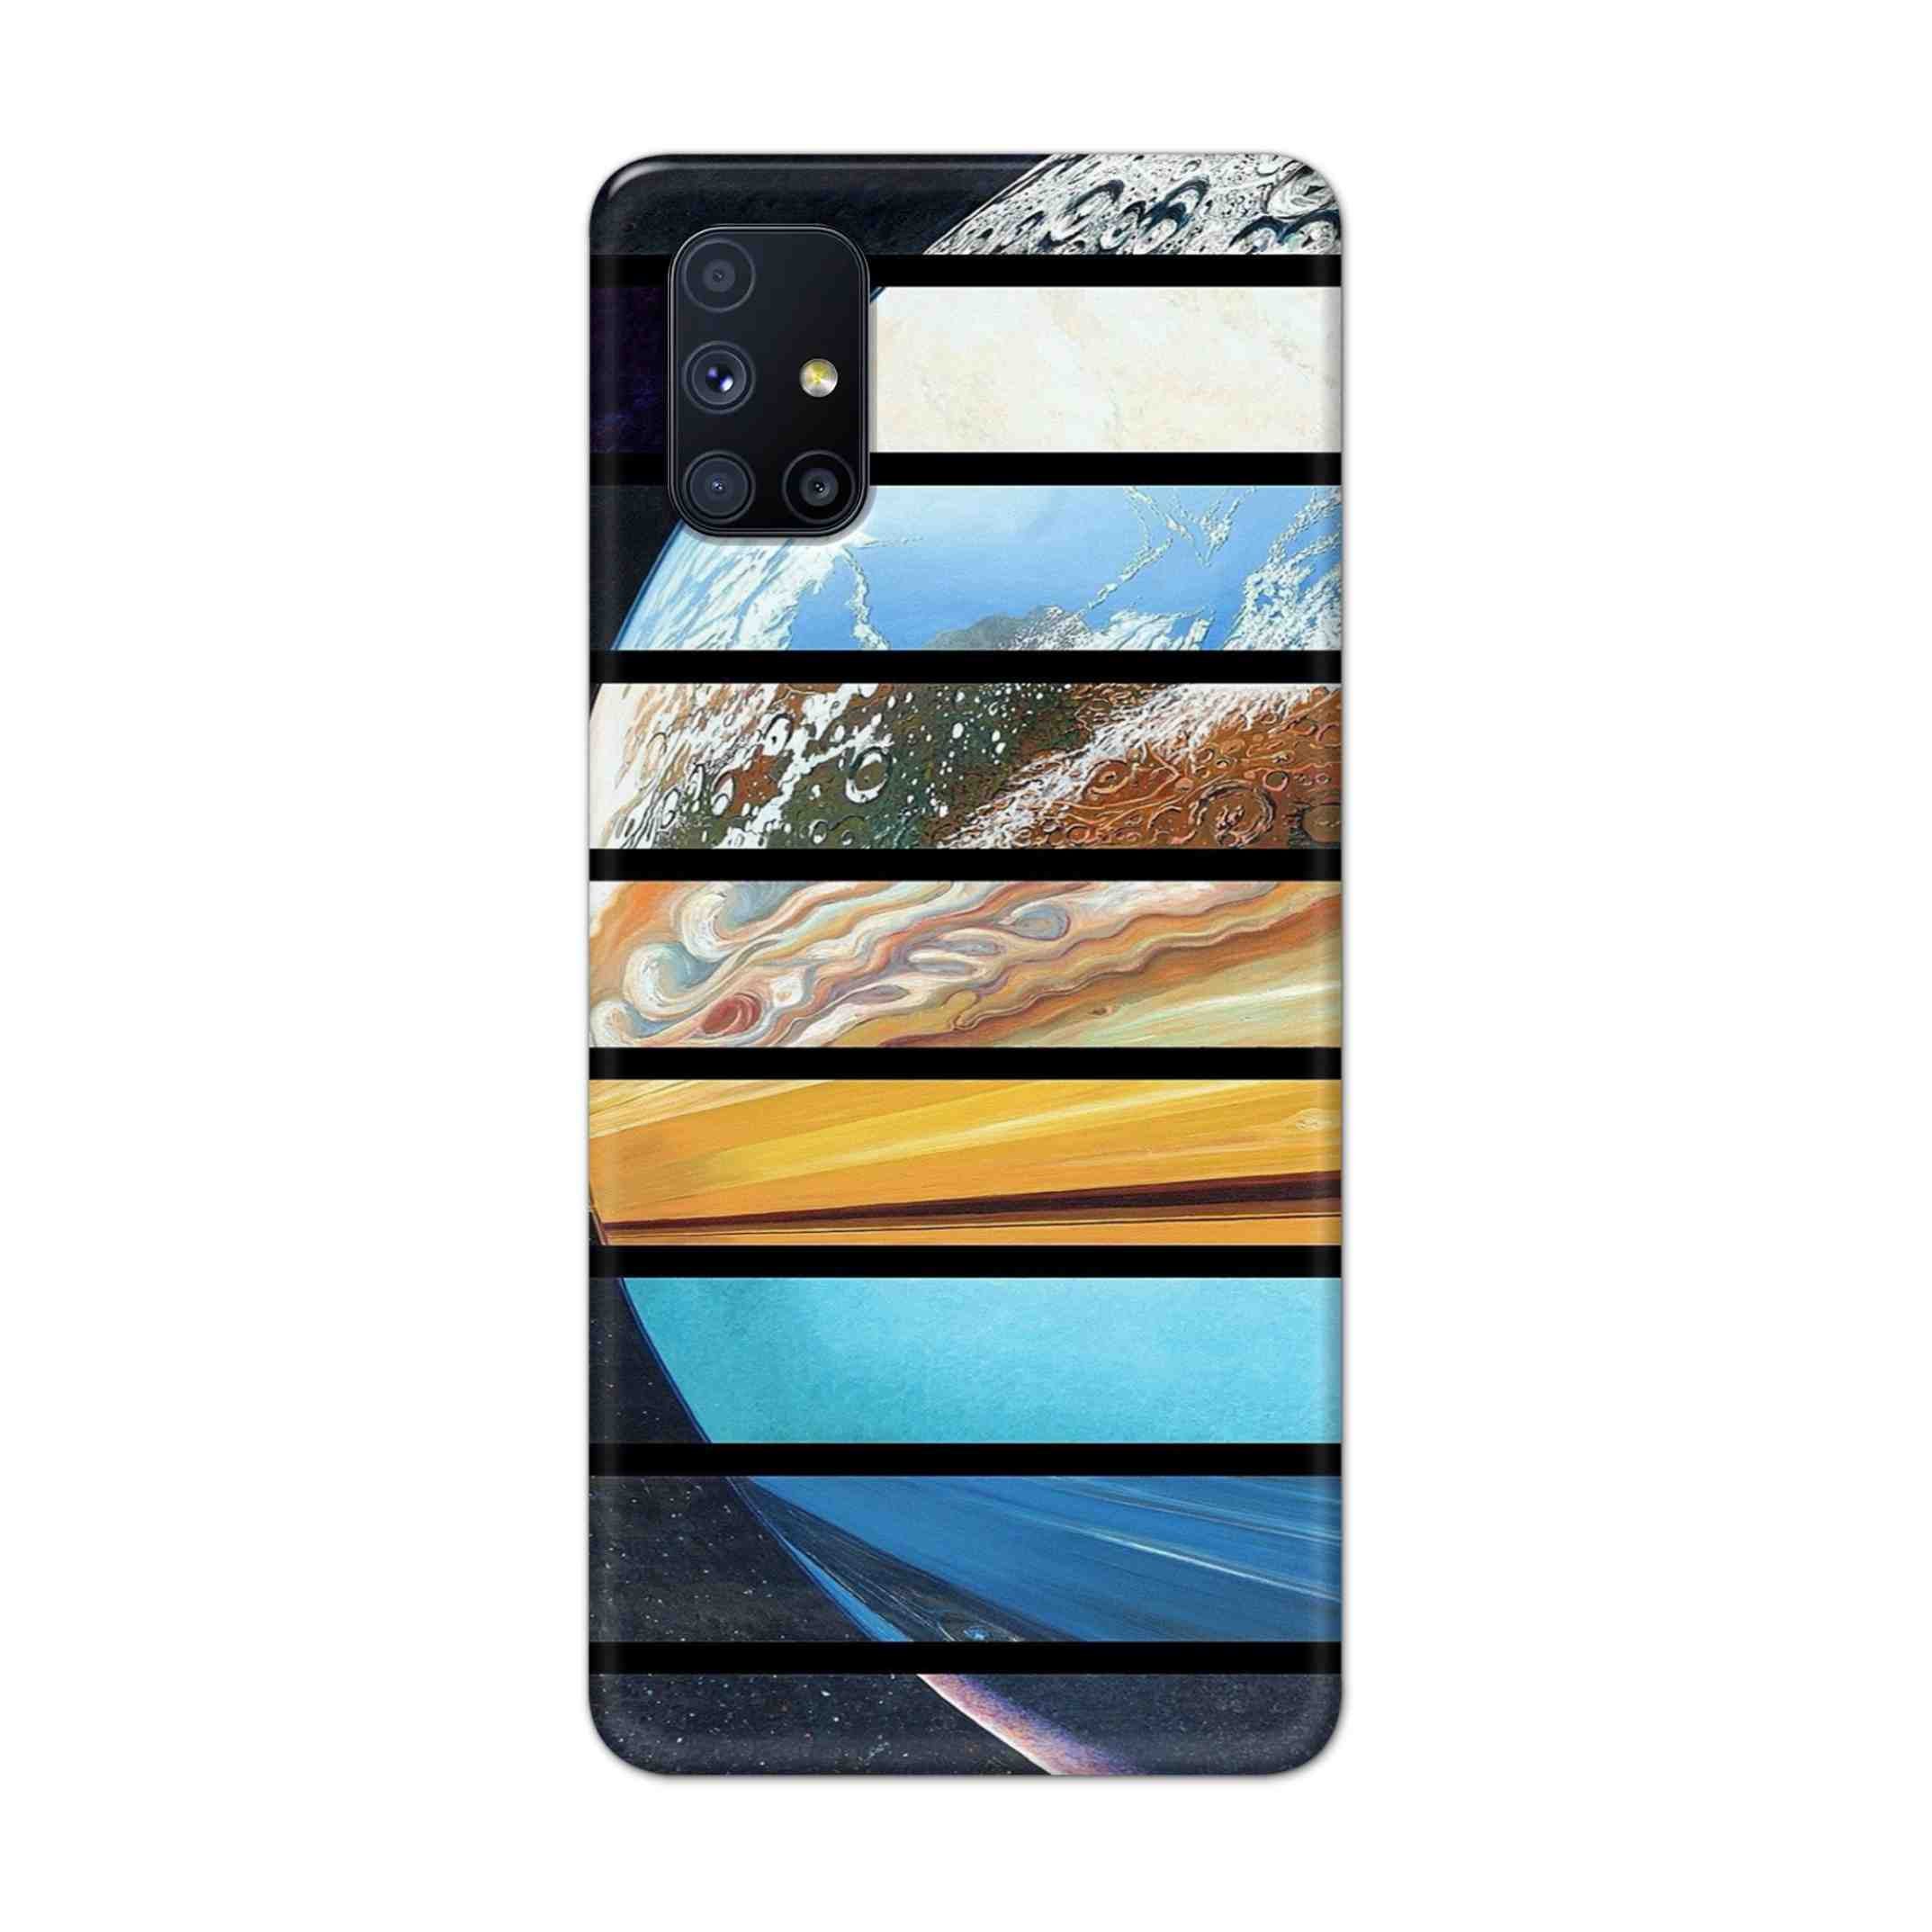 Buy Colourful Earth Hard Back Mobile Phone Case Cover For Samsung Galaxy M51 Online